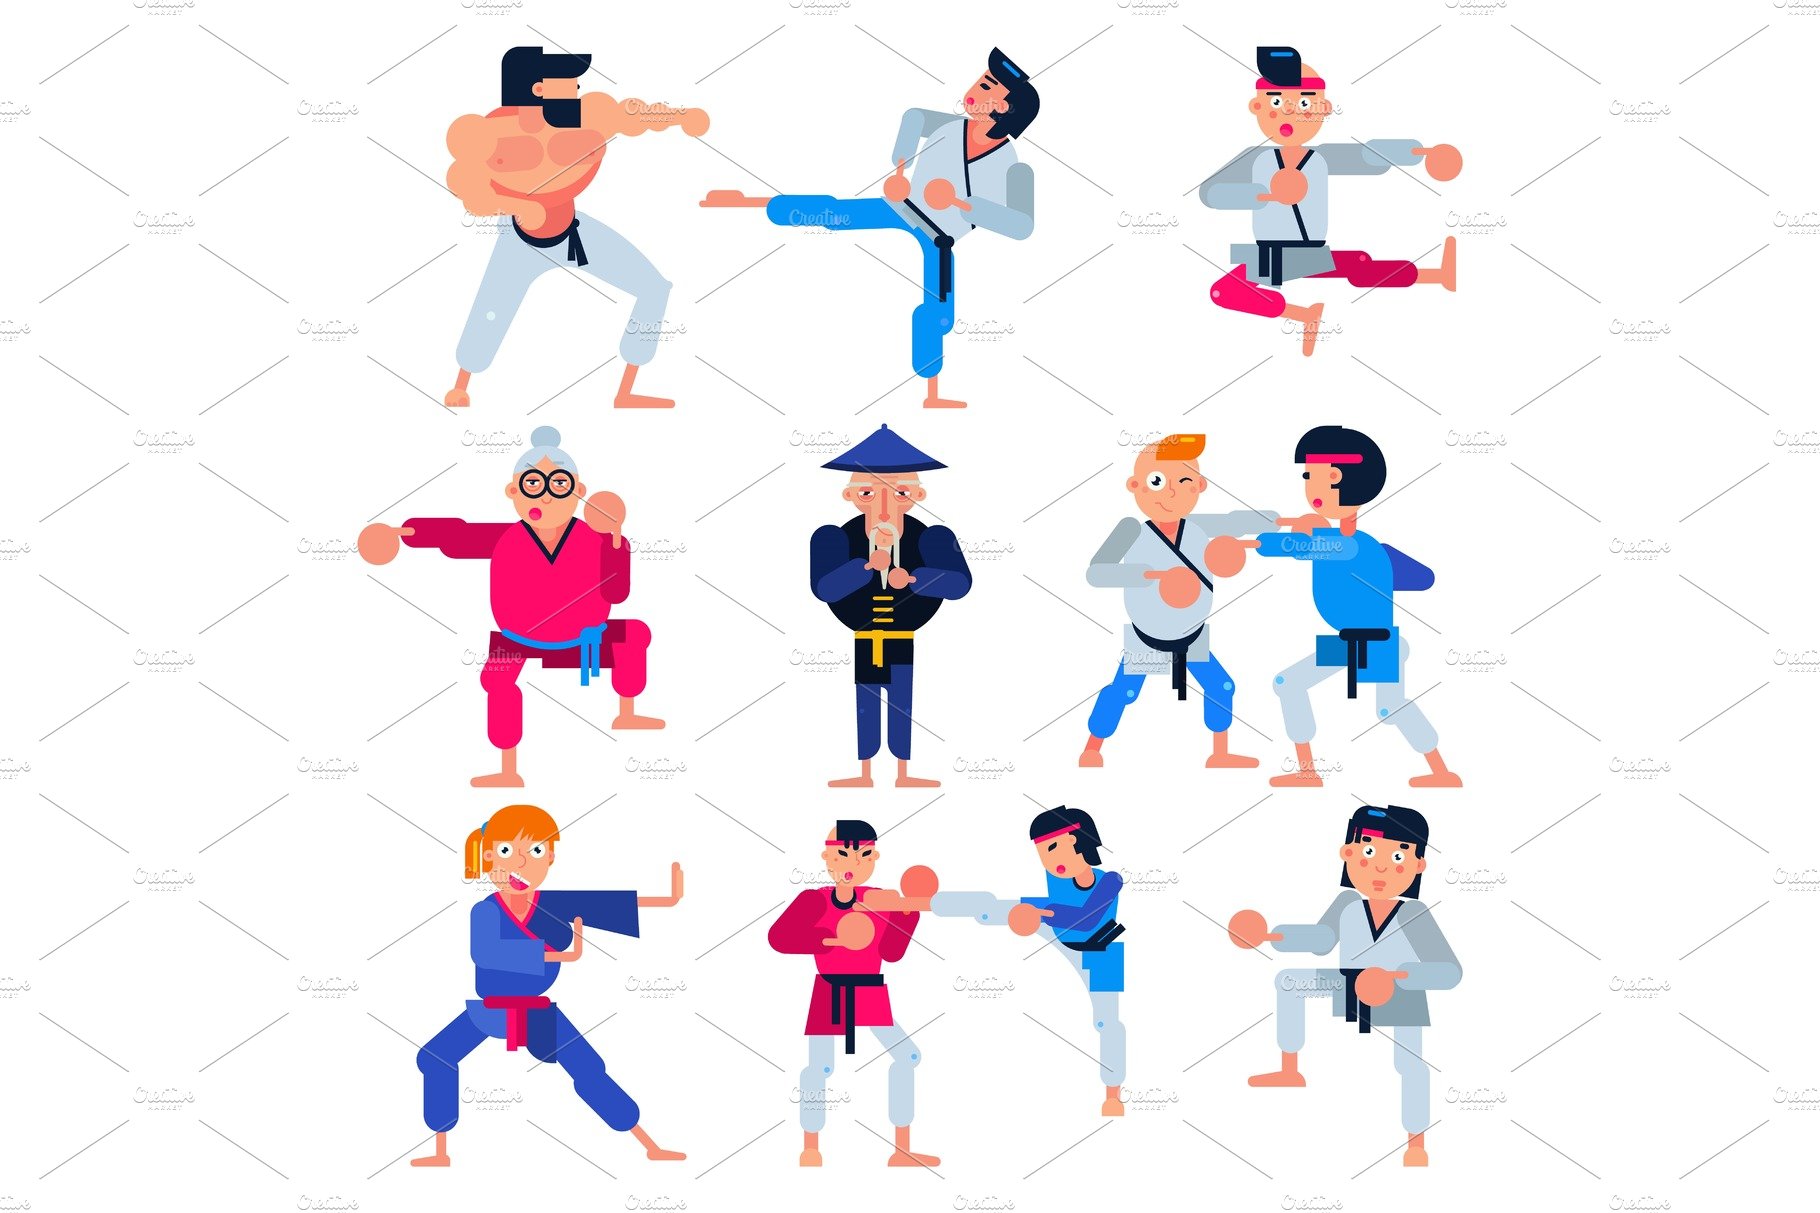 Karate vector martial karate-do character training attack illustration set ... cover image.